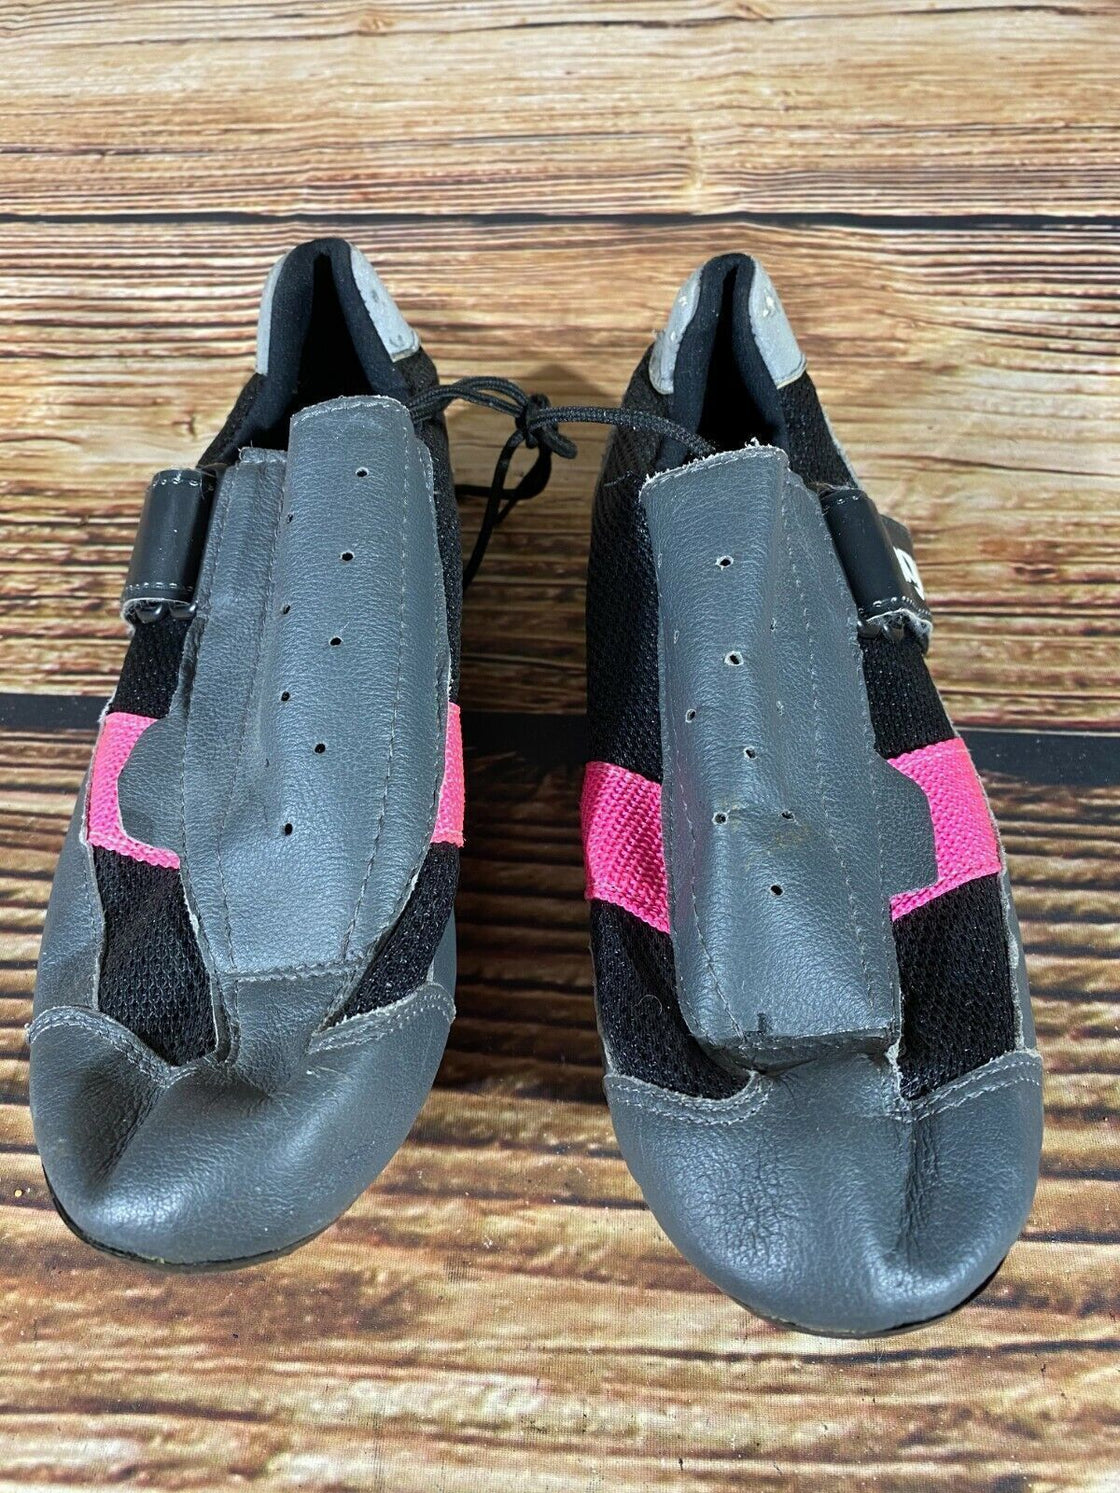 AGU Road Cycling Shoes Clipless Biking Boots Ladies Size EU 41 With Delta Cleats